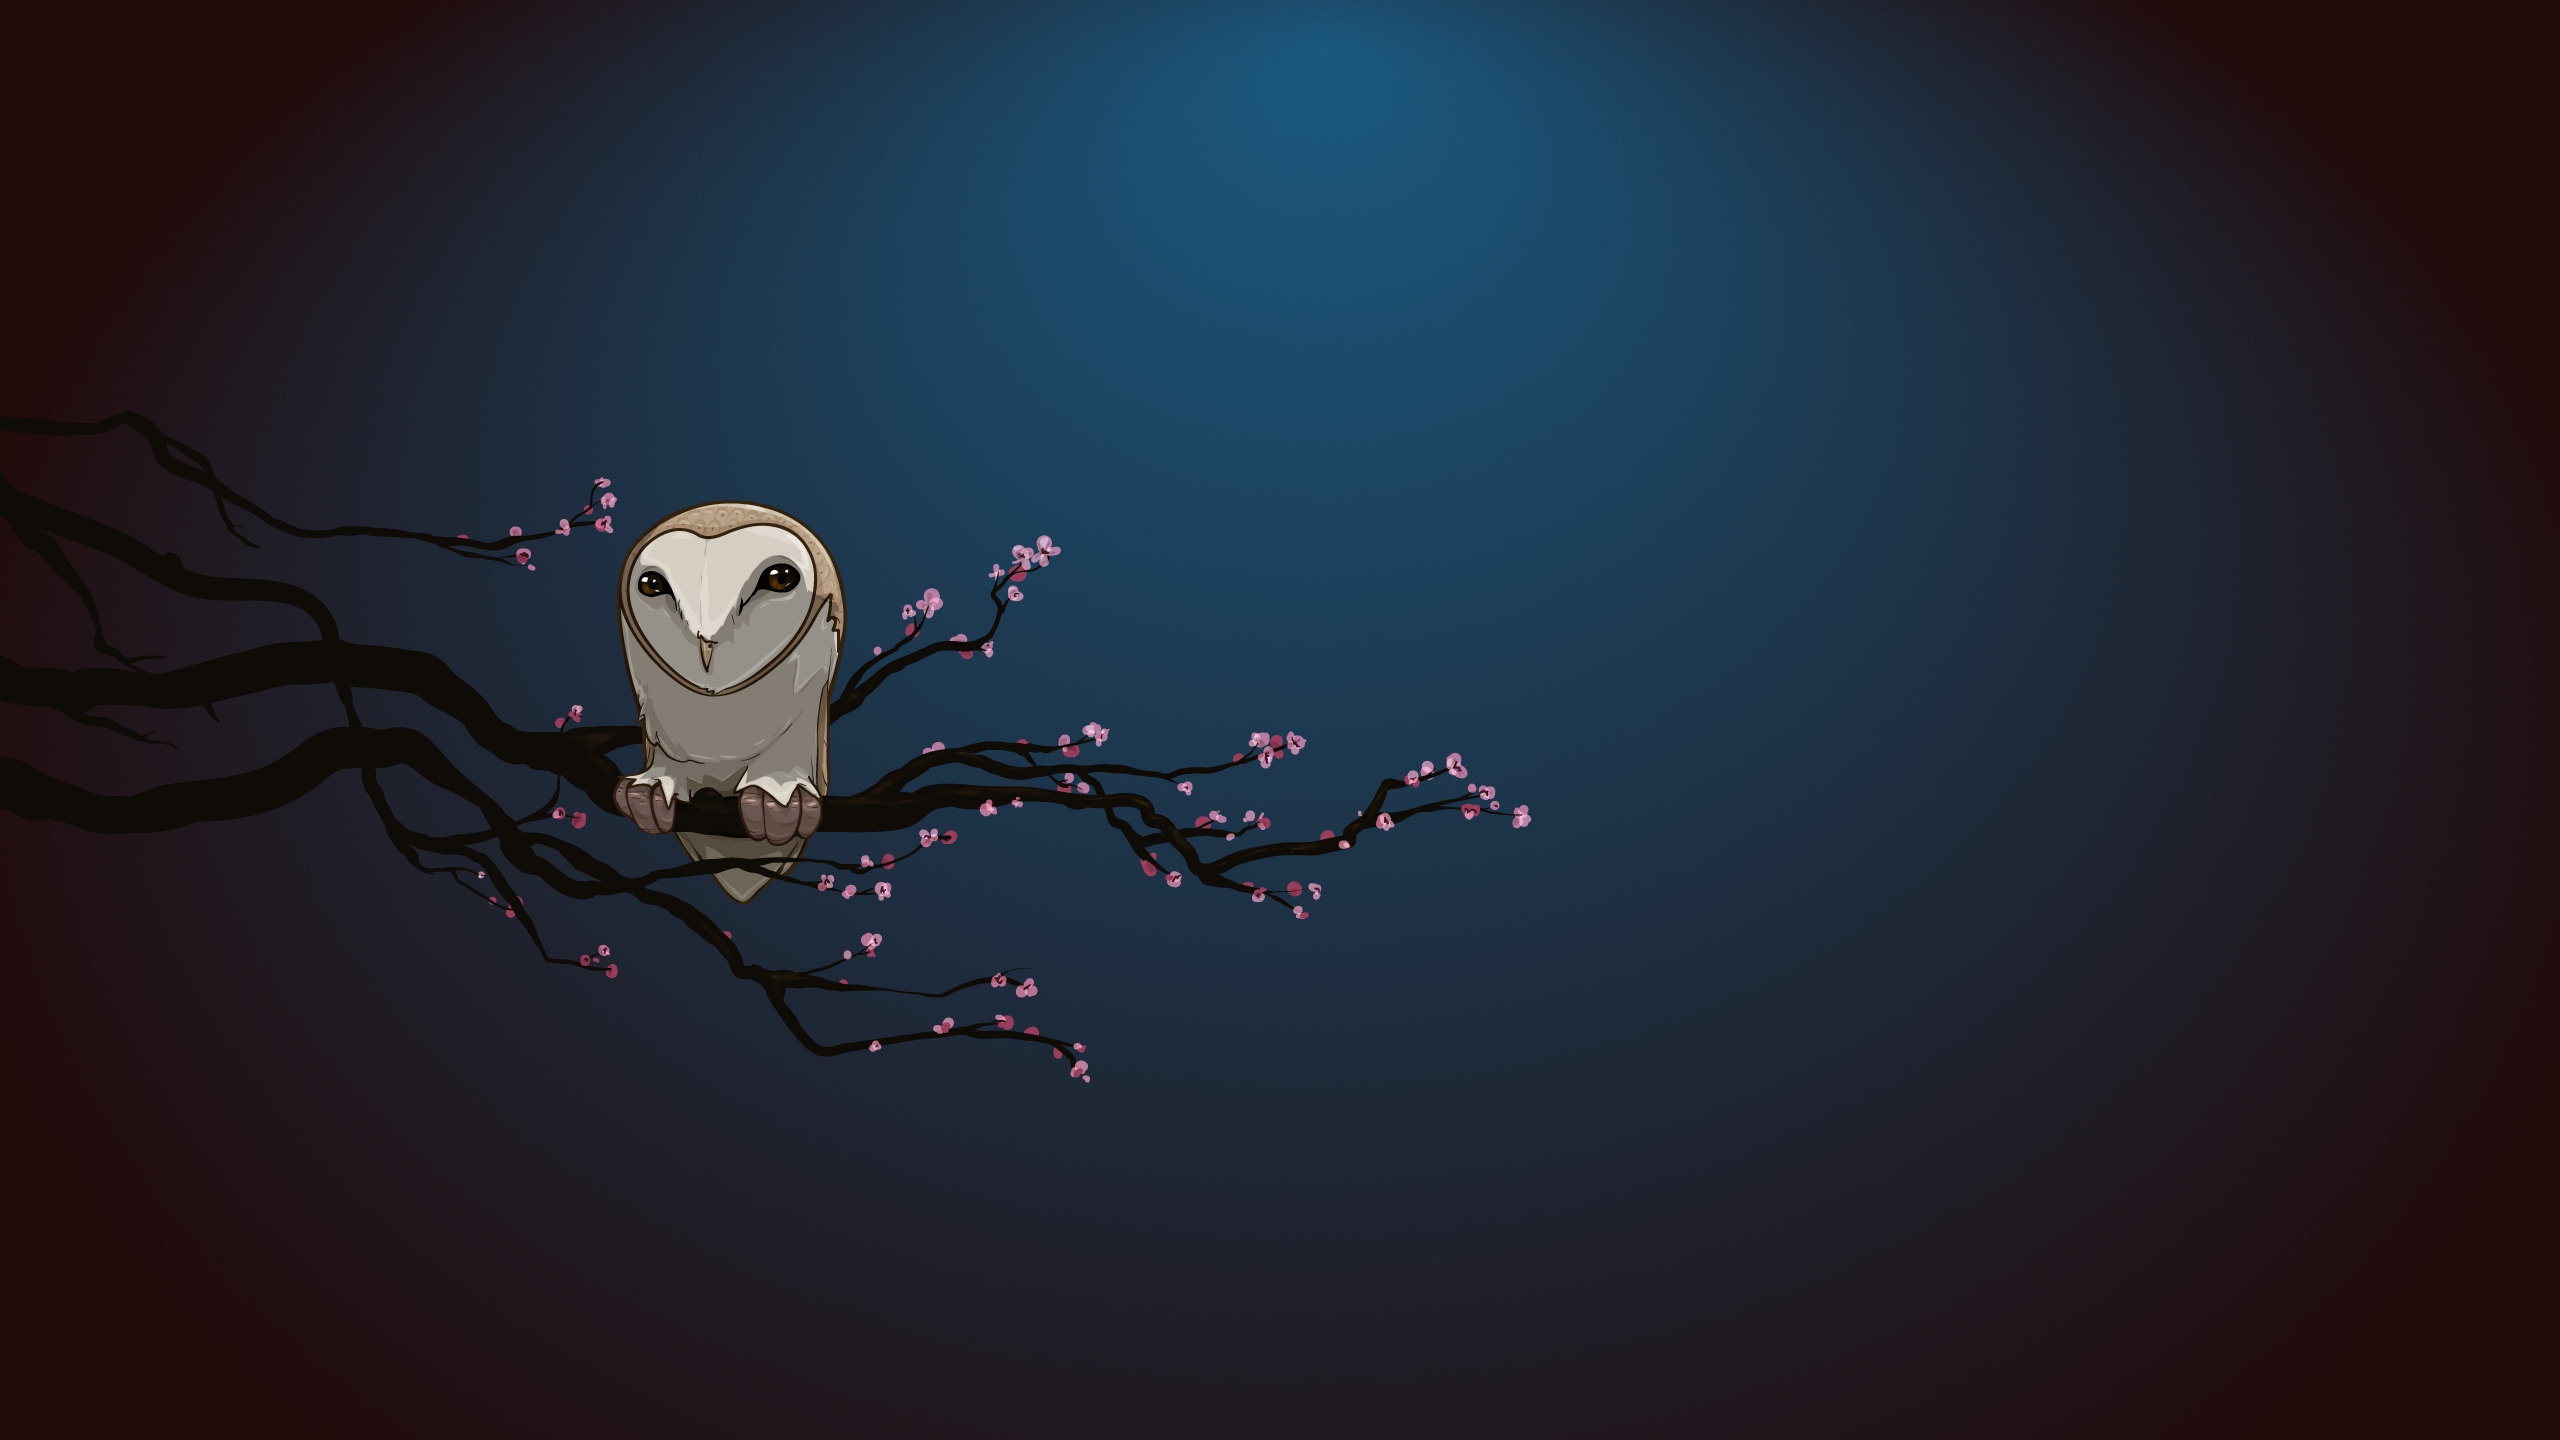 Owl Alone for 2560x1440 HDTV resolution